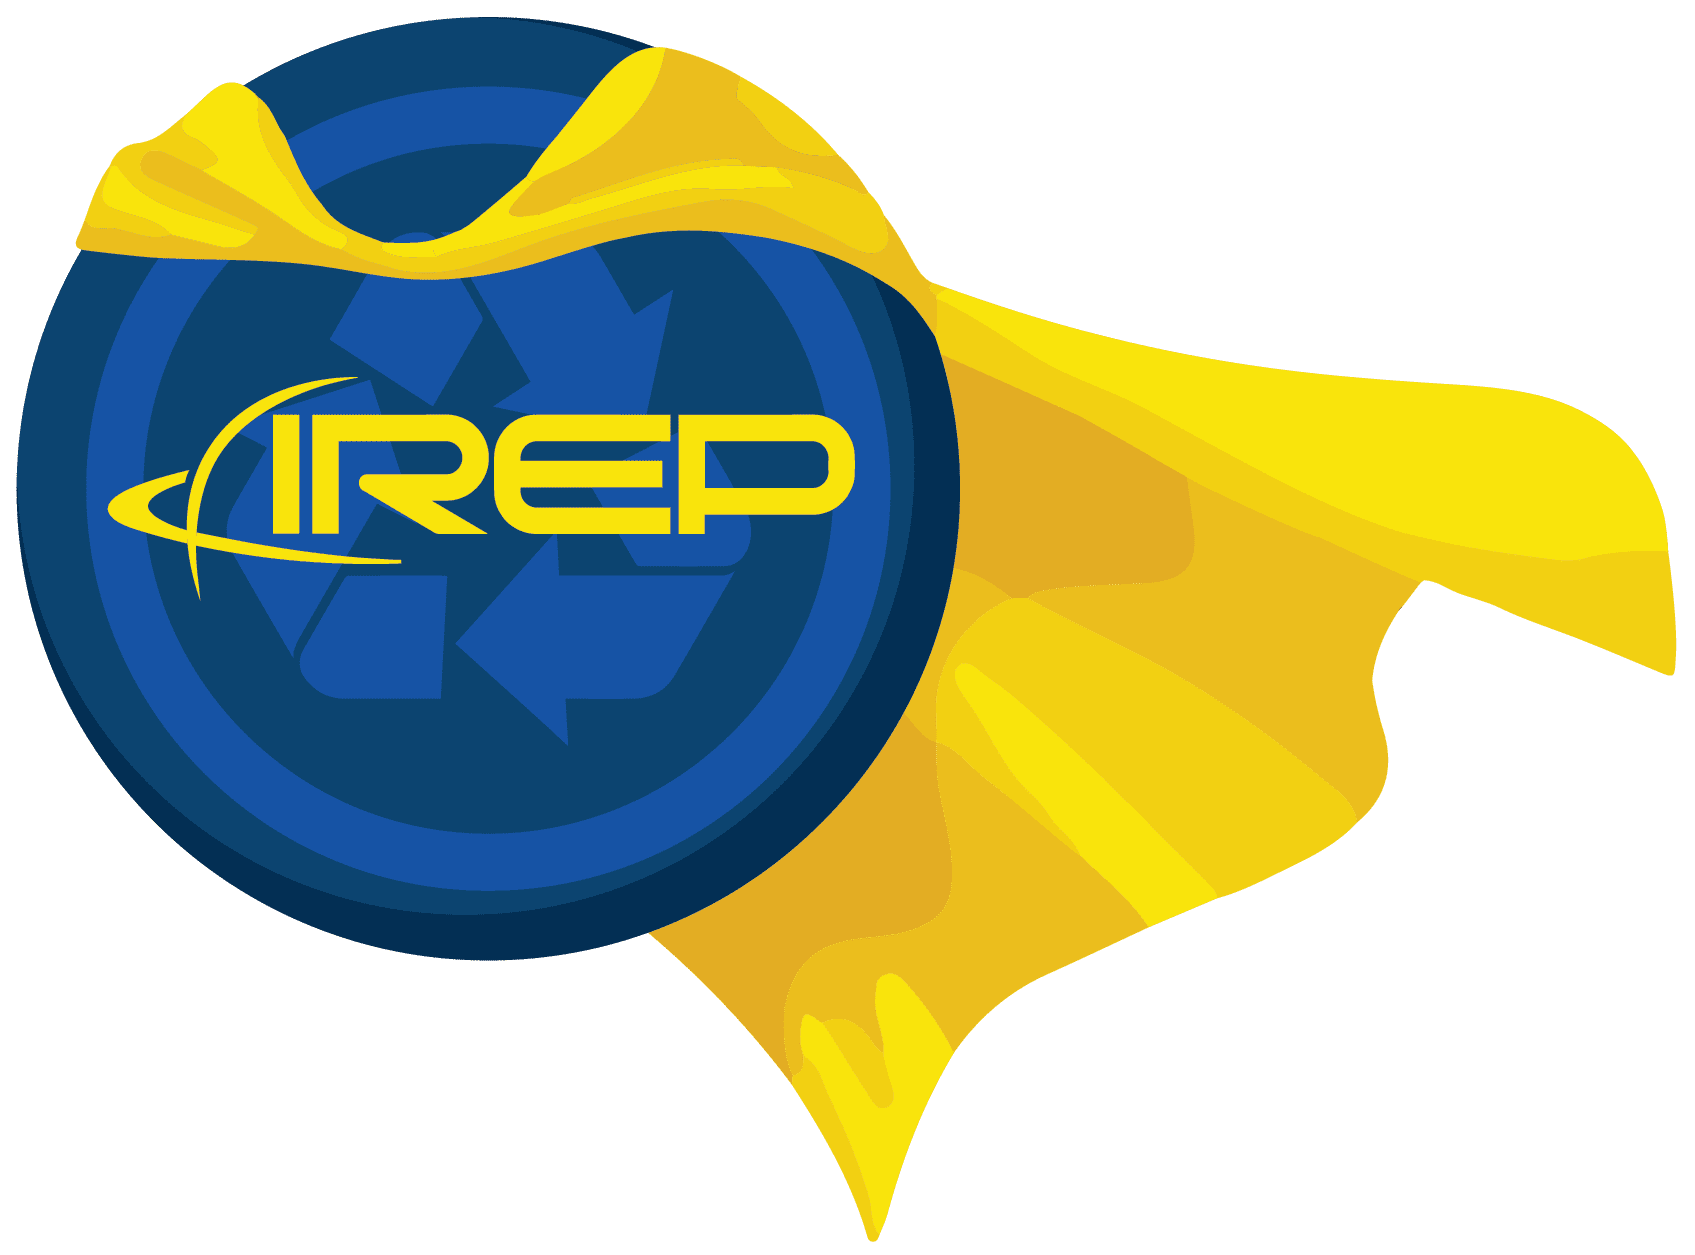 IREP Junk removal logo caped shield